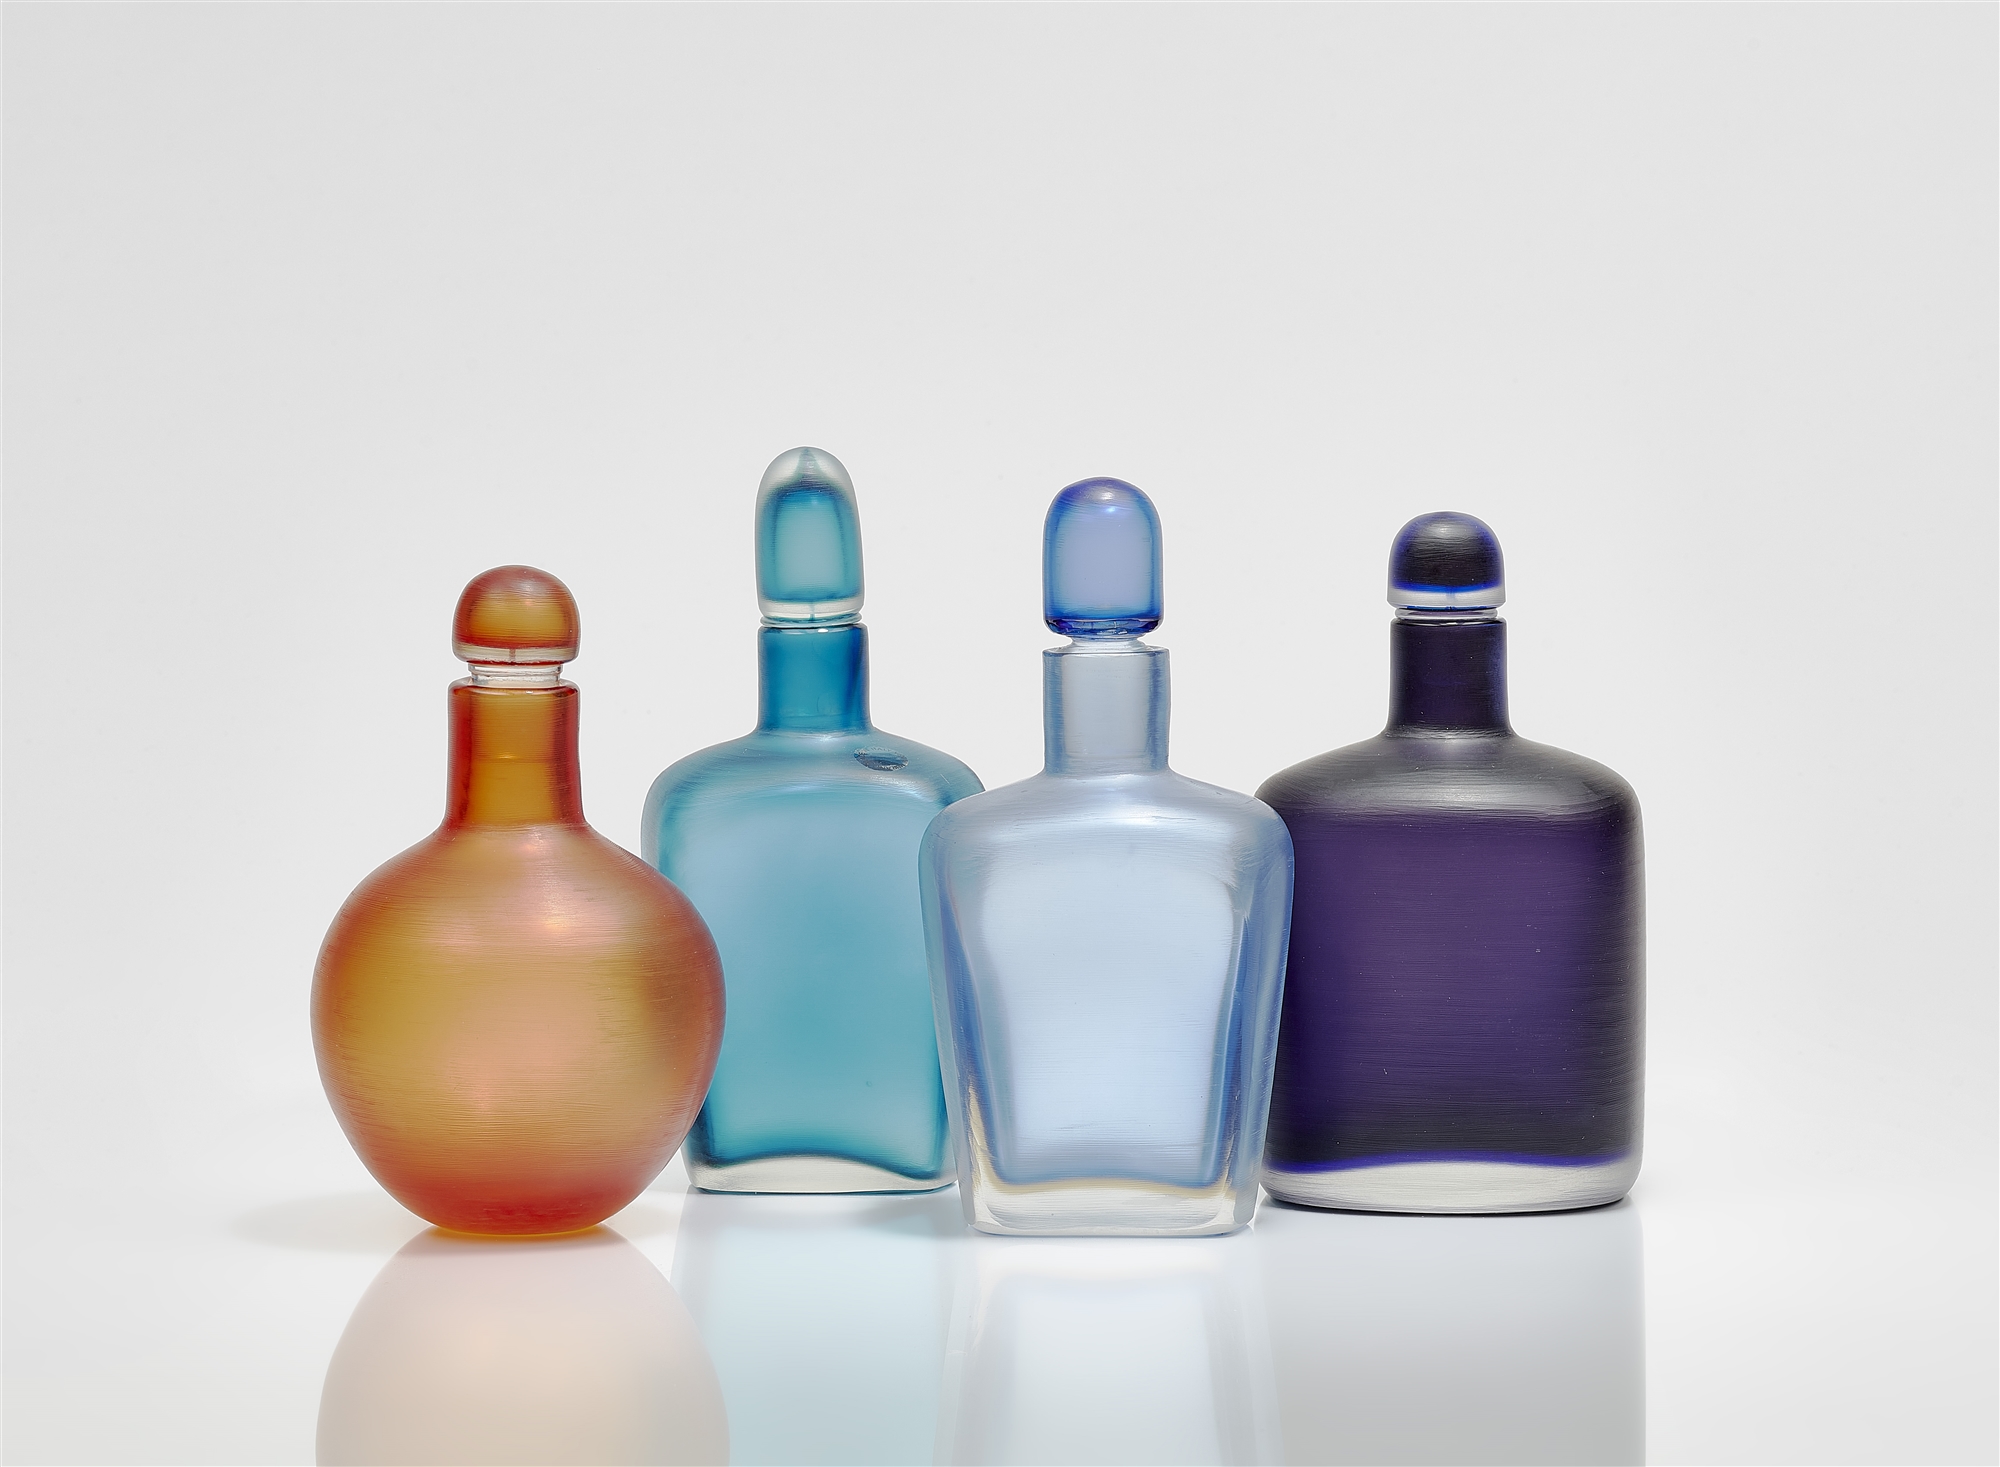 Four 'Inciso' bottles, Venini & C., Murano, designed by Paolo Venini 1950s, produced in the 1960s an